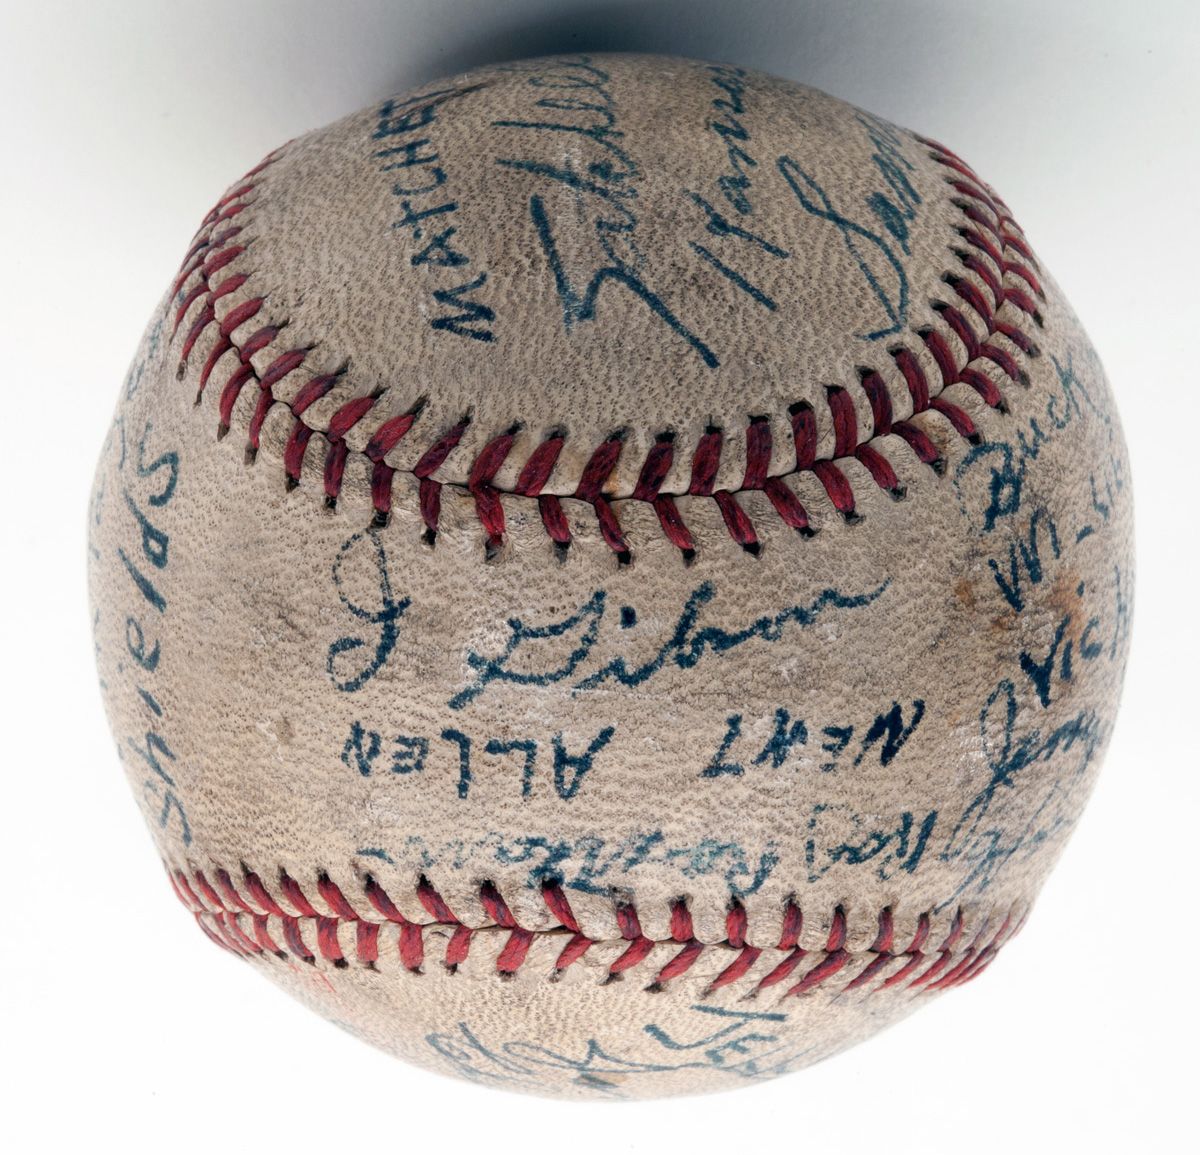 Lot Detail - RARE AND SIGNIFICANT 1942 NEGRO LEAGUE AUTOGRAPHED BASEBALL  WITH FOUR HALL OF FAMERS INCL. JOSH GIBSON AND SATCHEL PAIGE (EX-DAVID  WELLS COLLECTION)